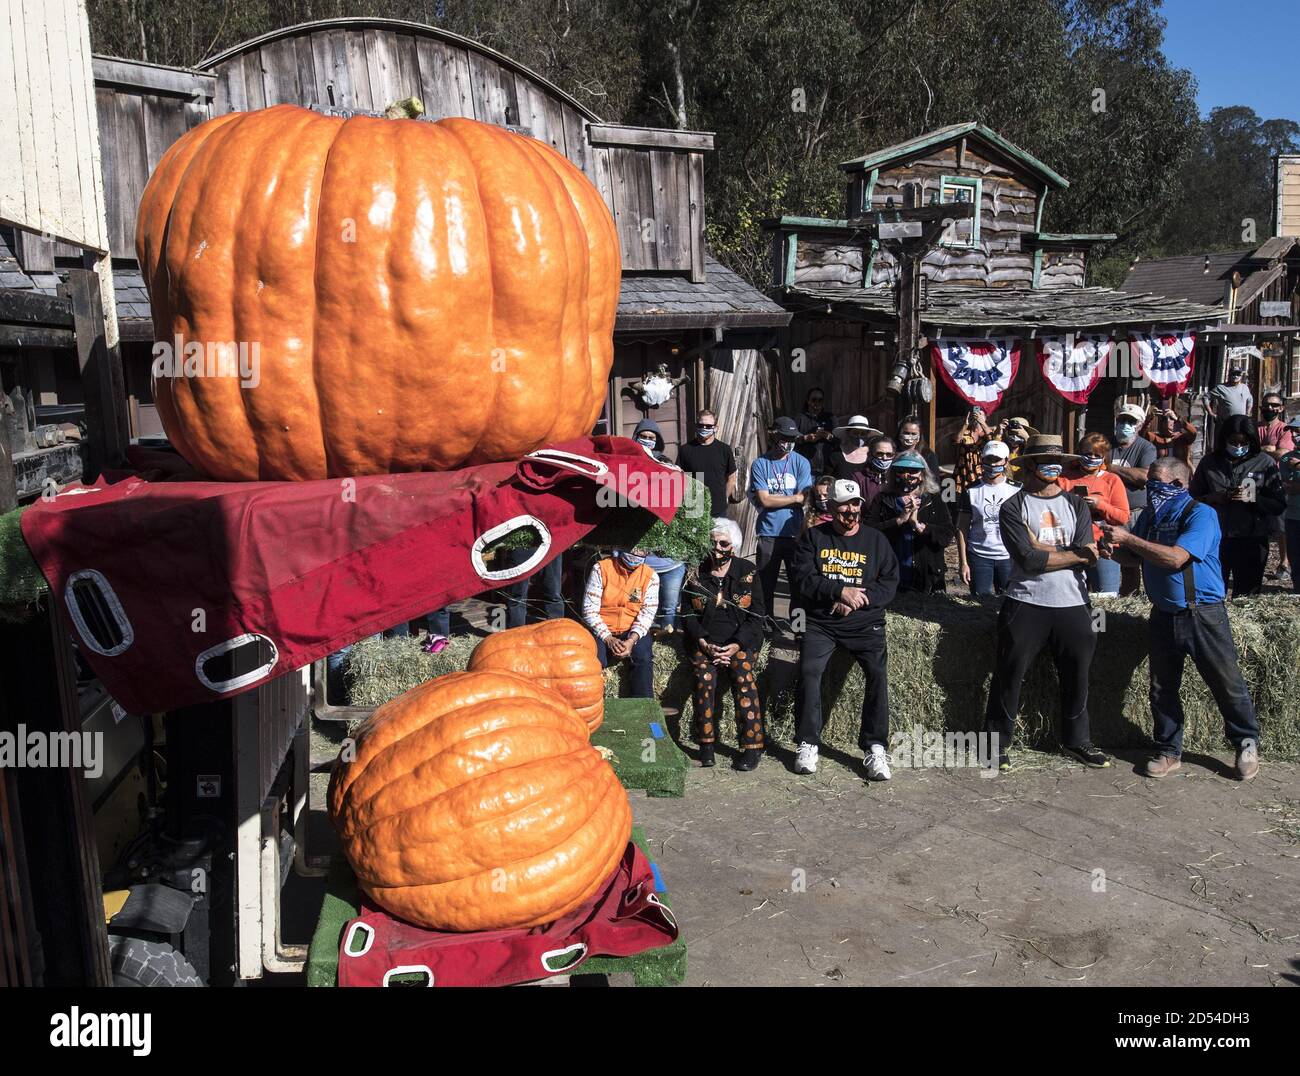 Half Moon Bay, United States. 12th Oct, 2020. The beauty contest portion of the 47th annual Championship Pumpkin Weigh-off is held in Half Moon Bay, California on Monday, October 12, 2020. Travis Gienger of Anoka, Minnesota won this year's competition with his 2350 pound entry. Photo by Terry Schmitt/UPI Credit: UPI/Alamy Live News Stock Photo